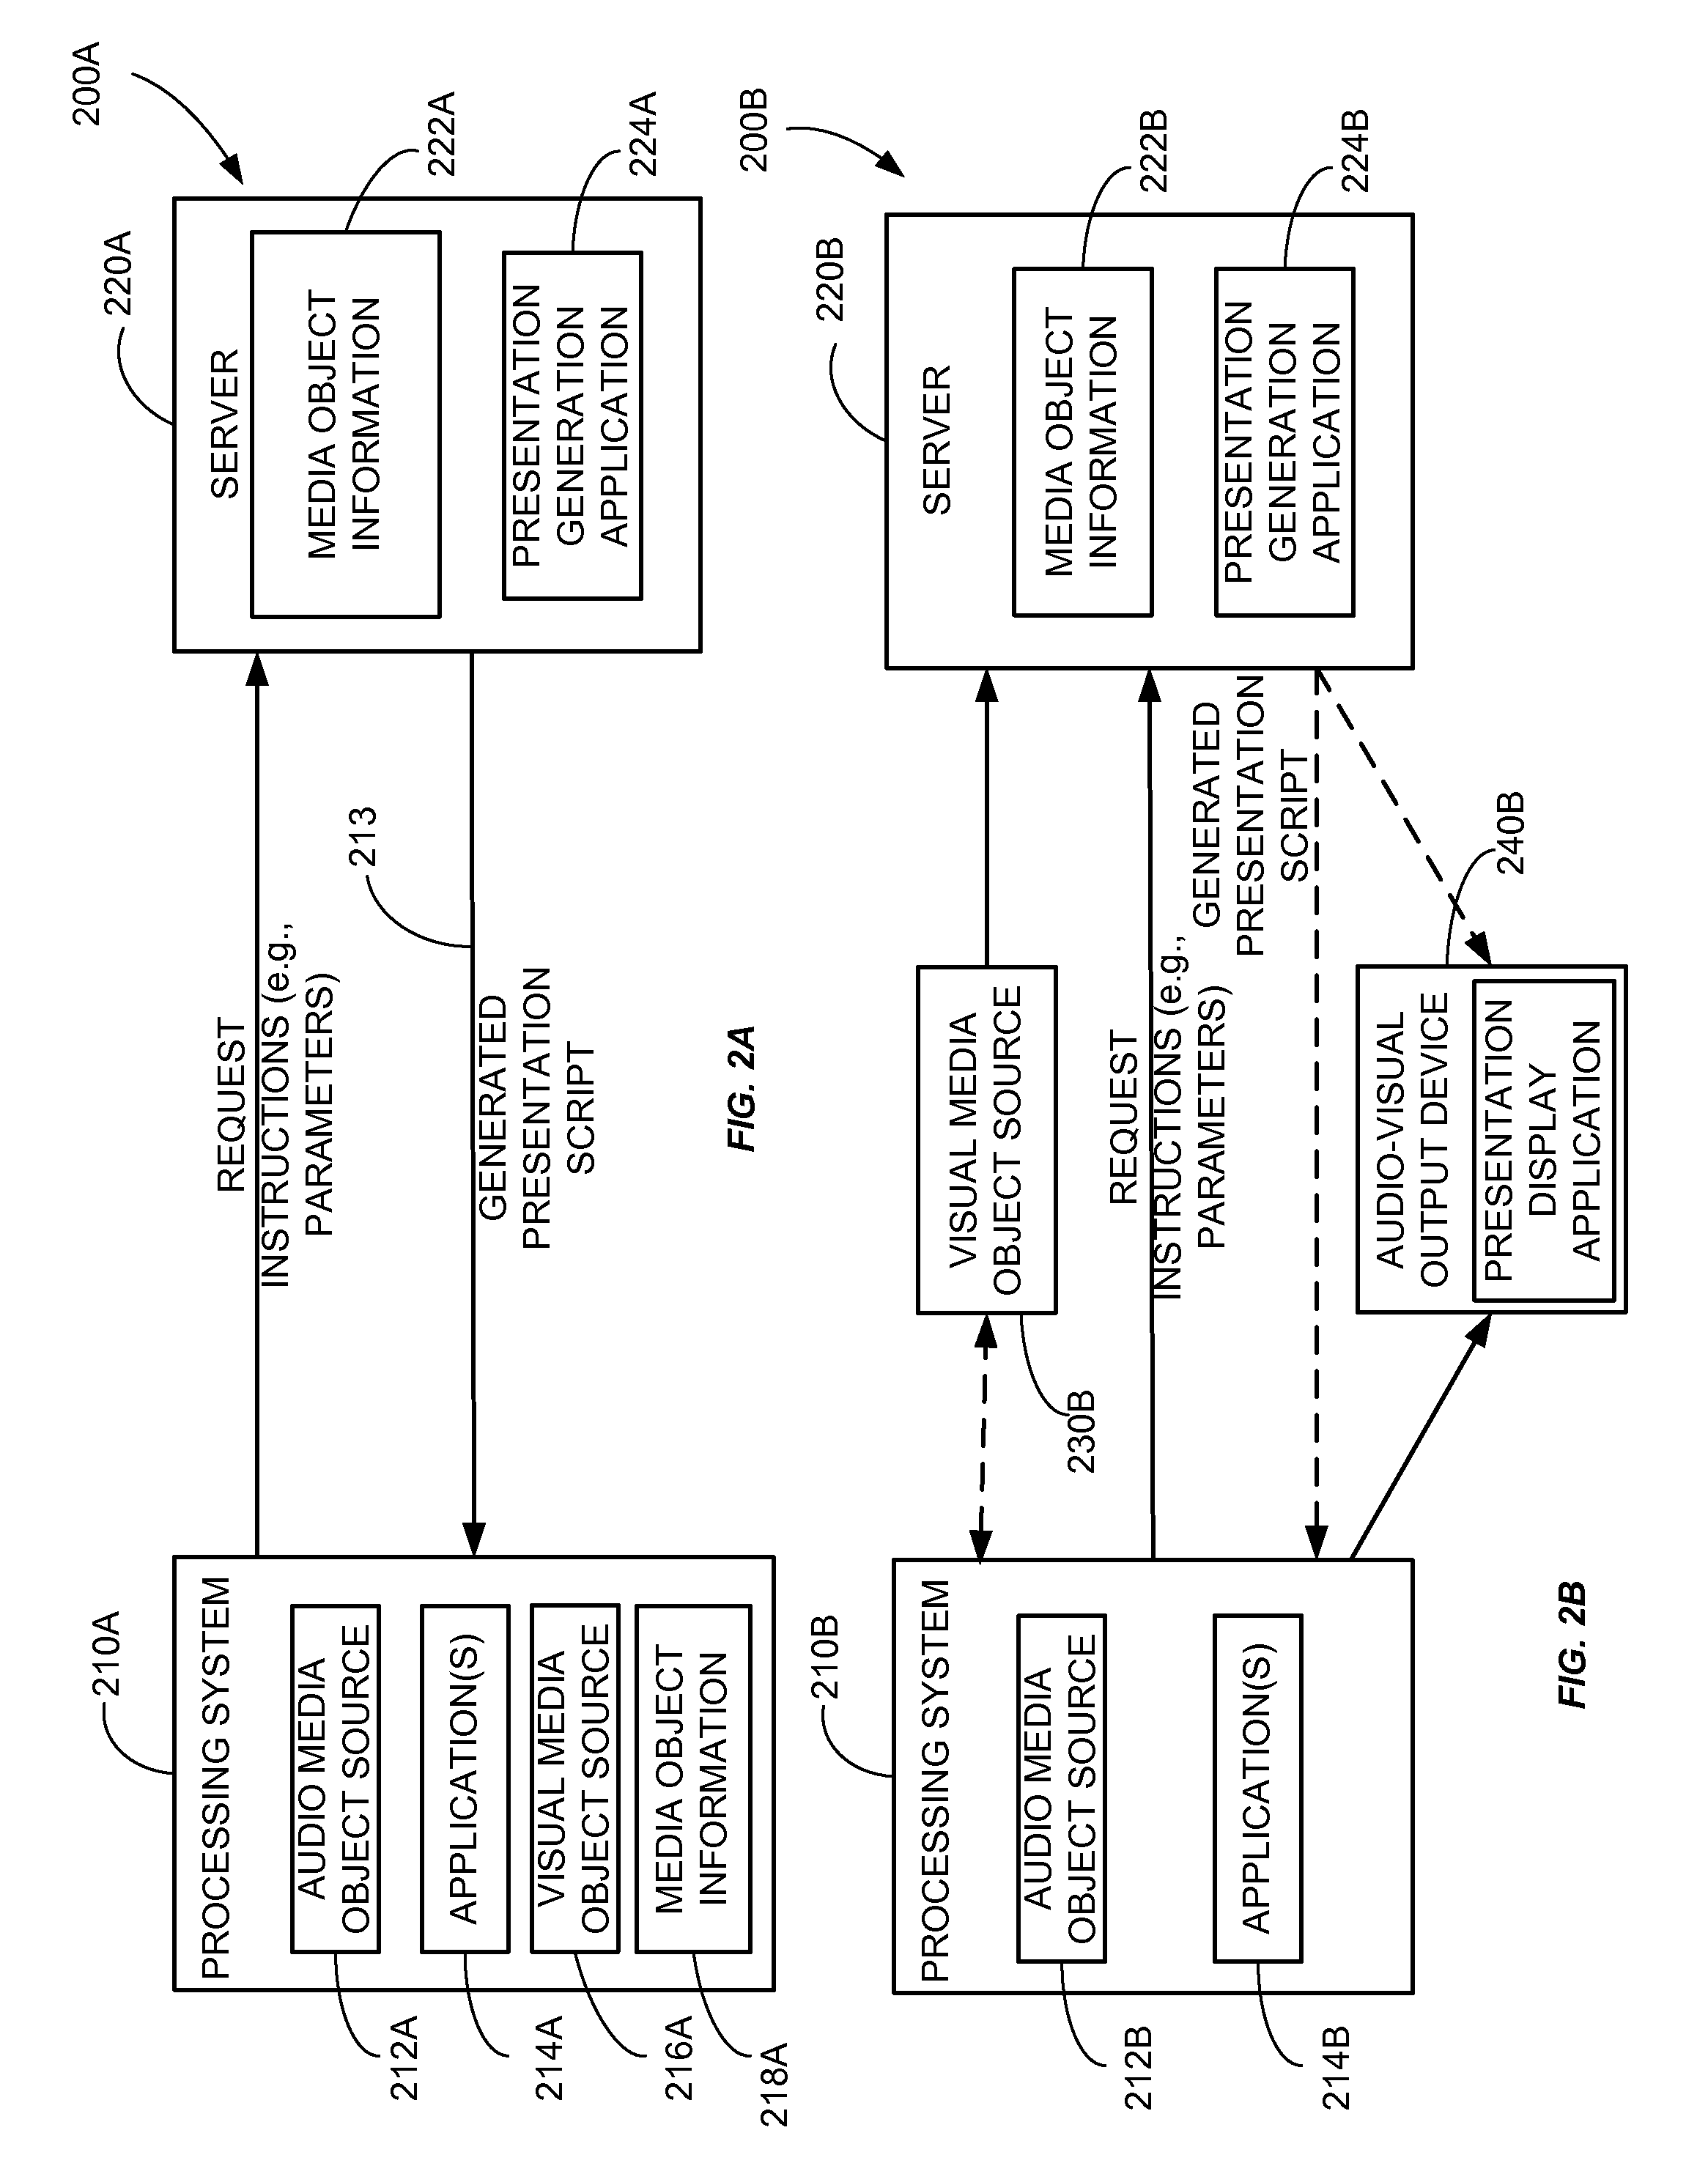 Systems, methods, and apparatus for generating an audio-visual presentation using characteristics of audio, visual and symbolic media objects